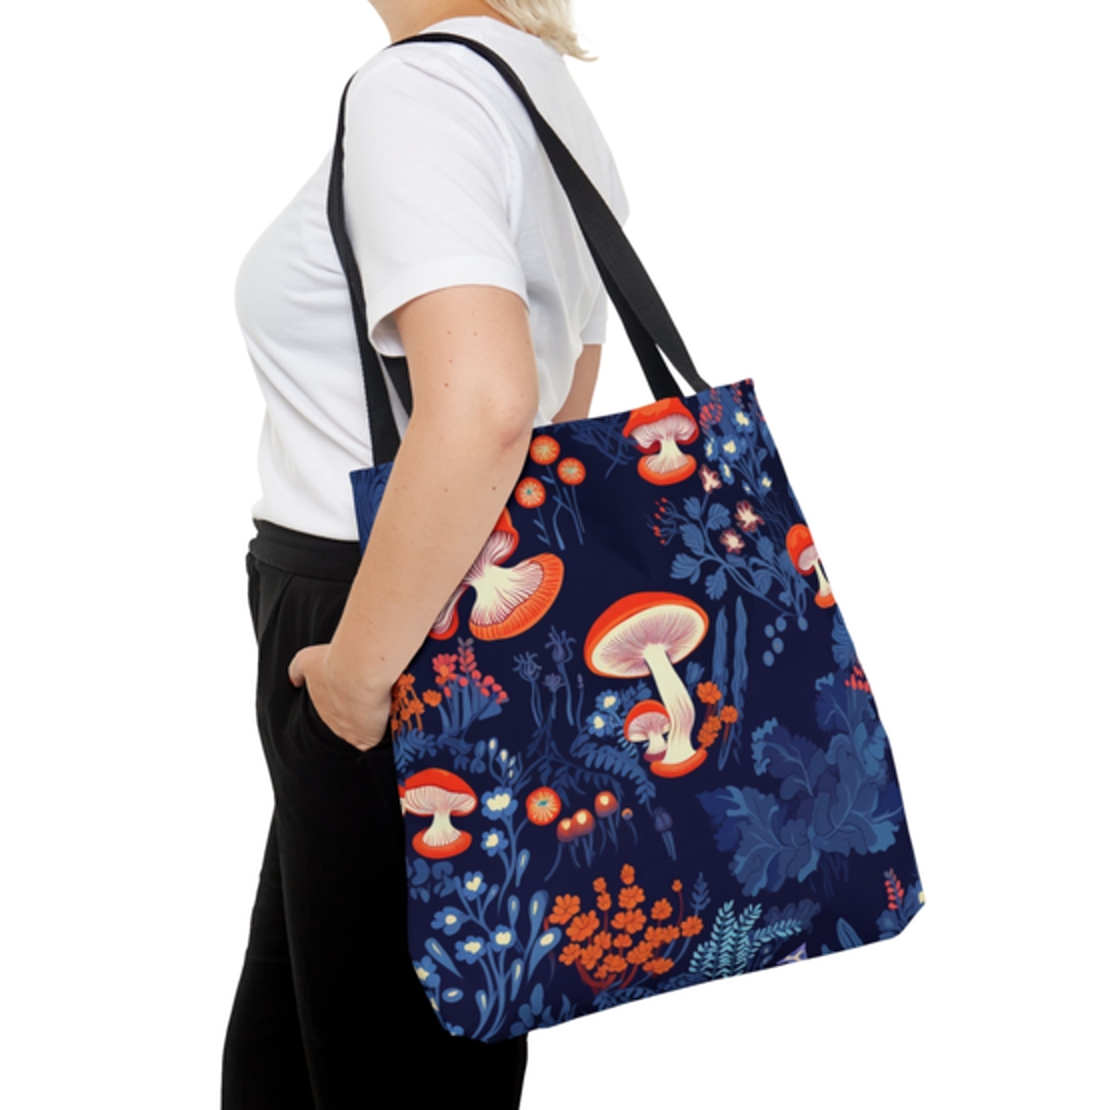 Mushroom Tote Bag - Eco-Friendly, Nature Lover's Carry - FungiFly